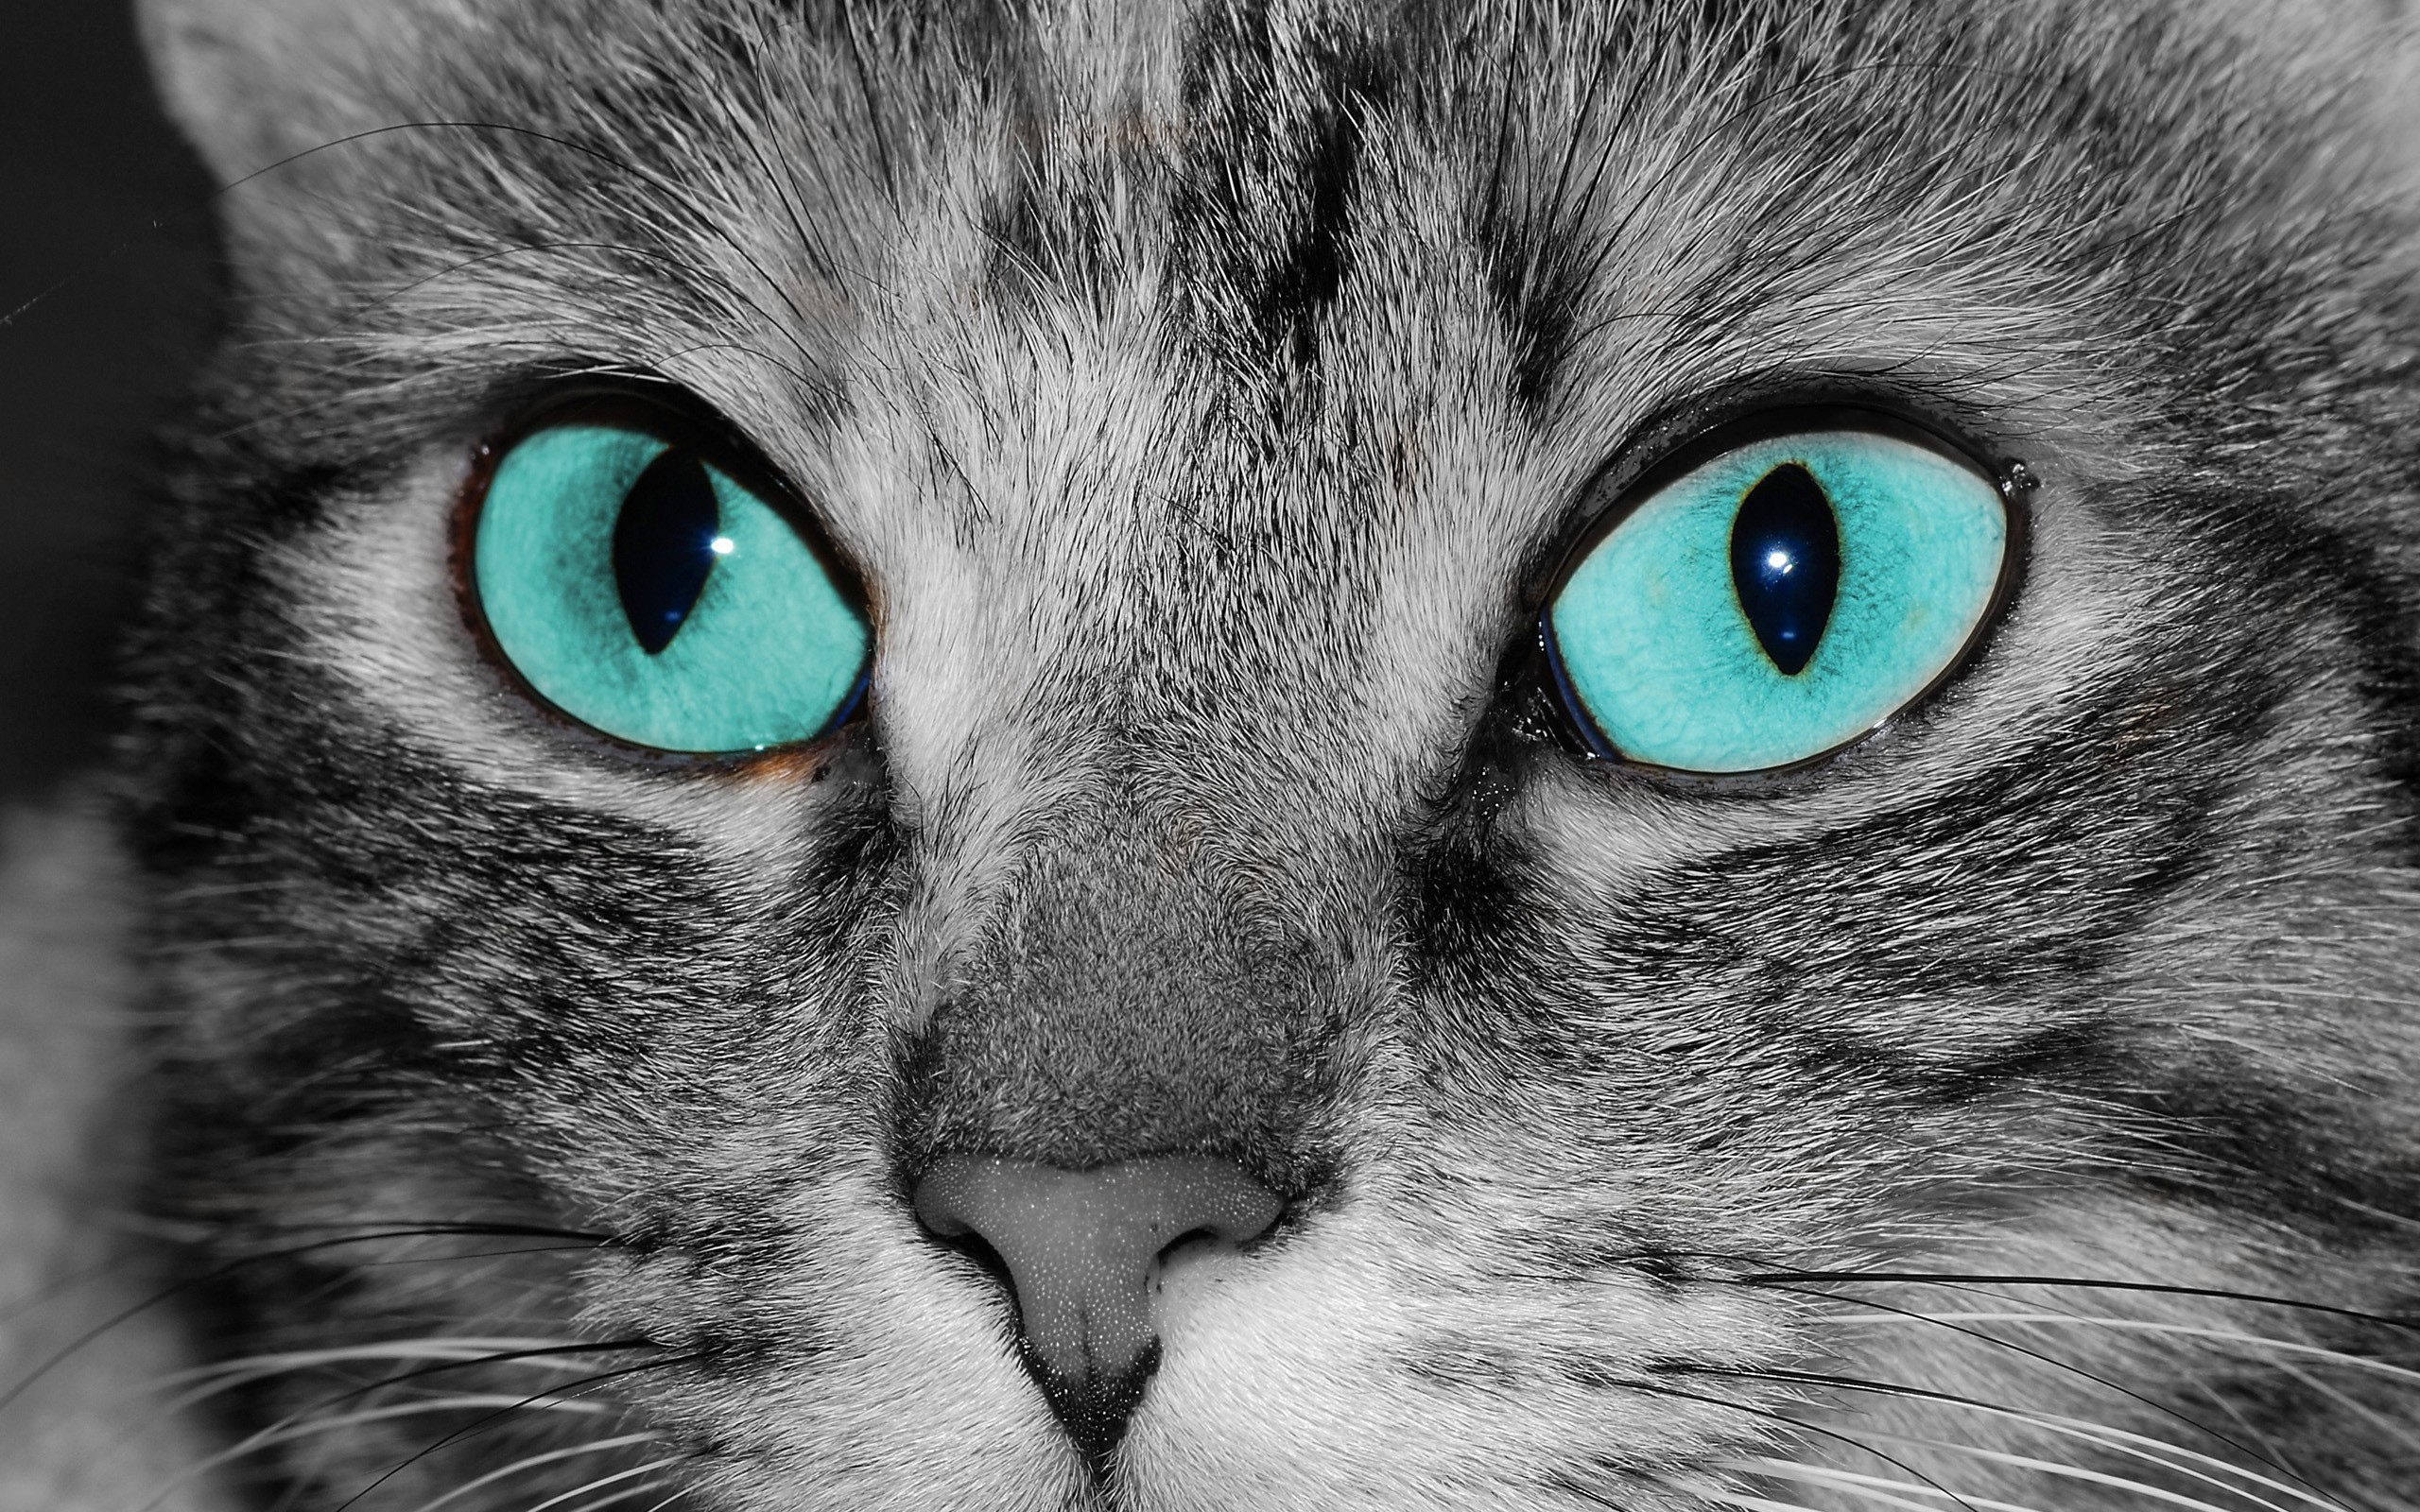 Blue-eyed cat wallpapers and images - wallpapers, pictures, photos